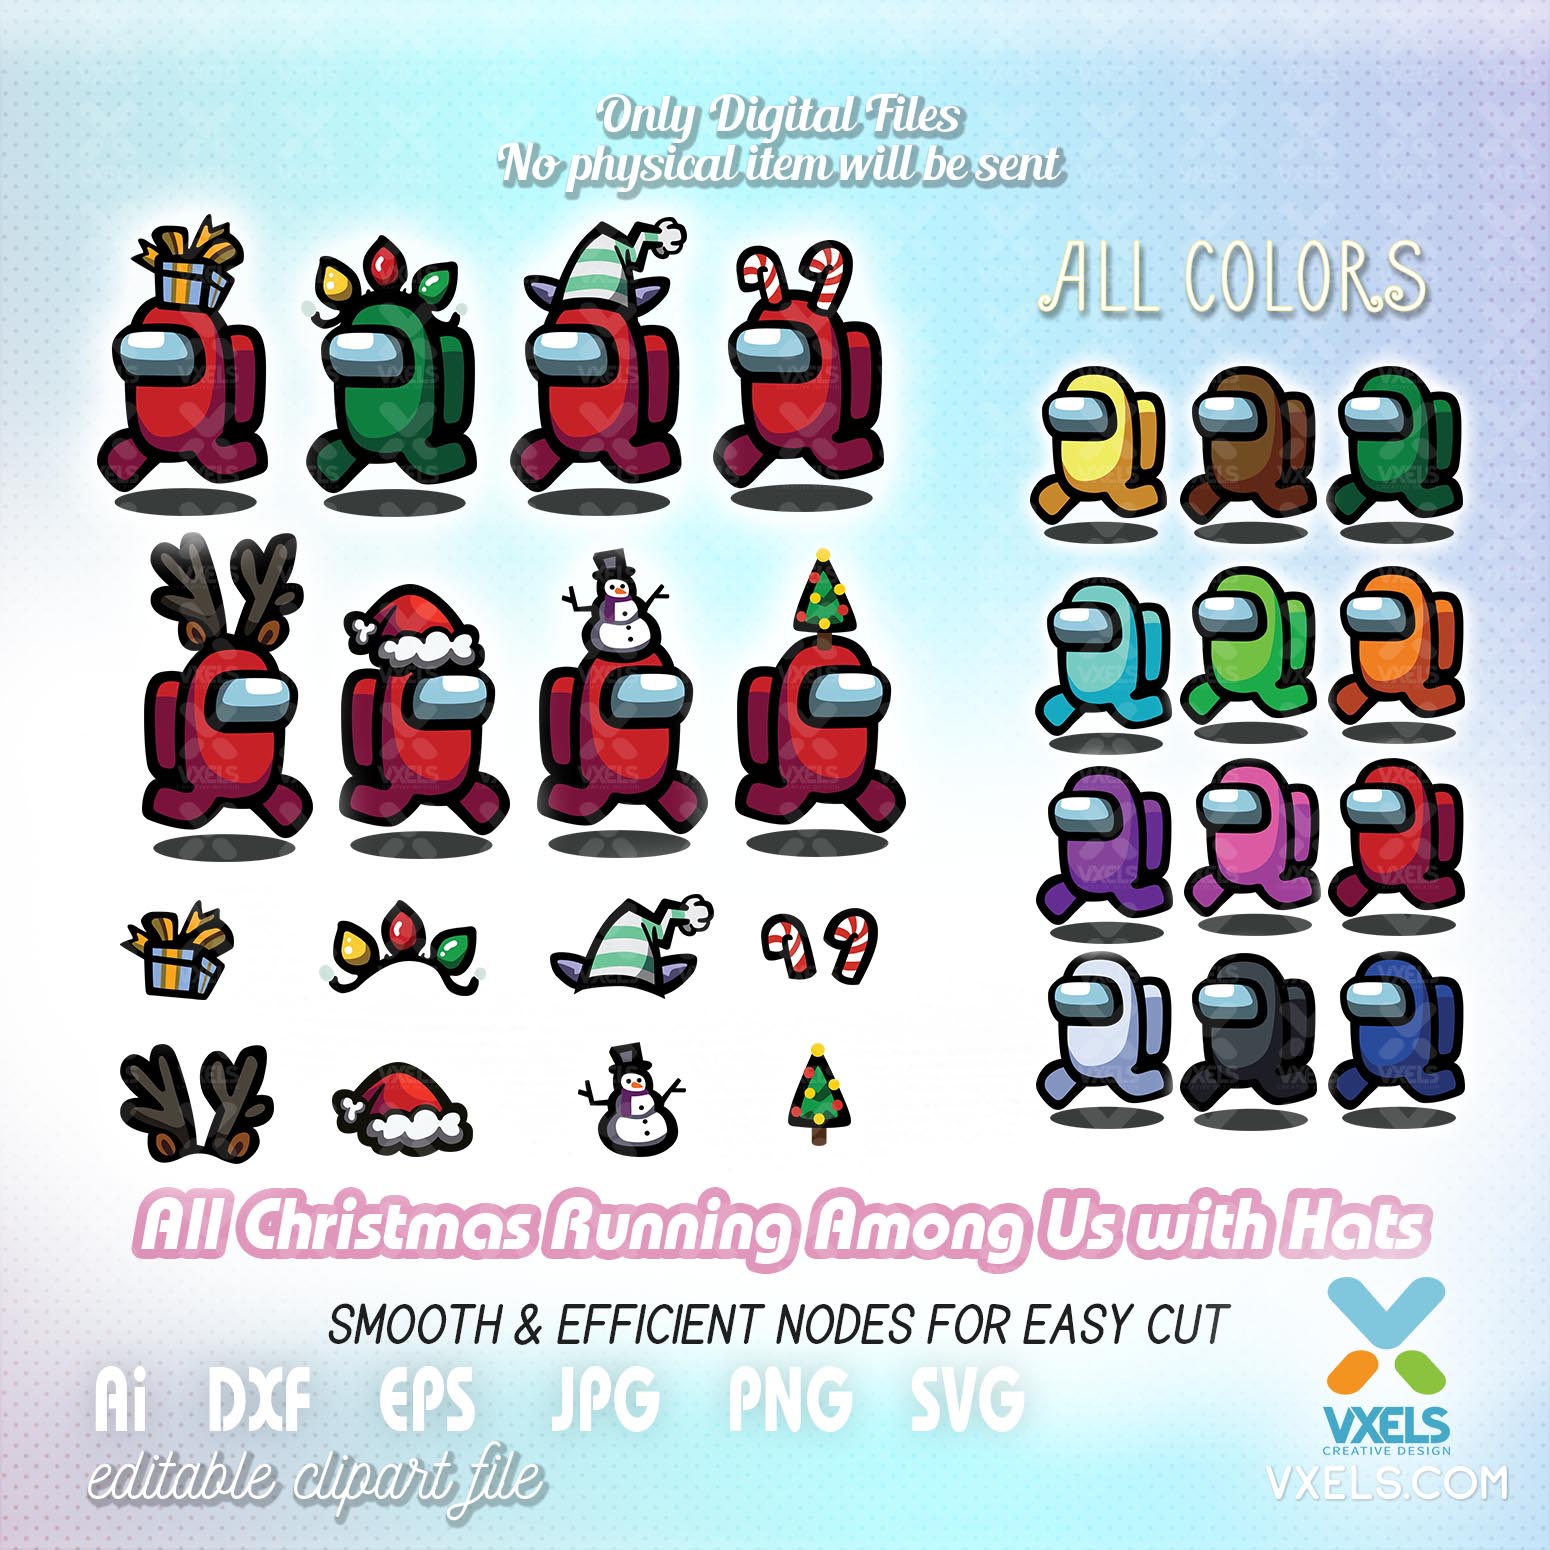 All Christmas Hats Running Among Us With All Character Colors Svg Bundle - among us t shirt roblox transparent